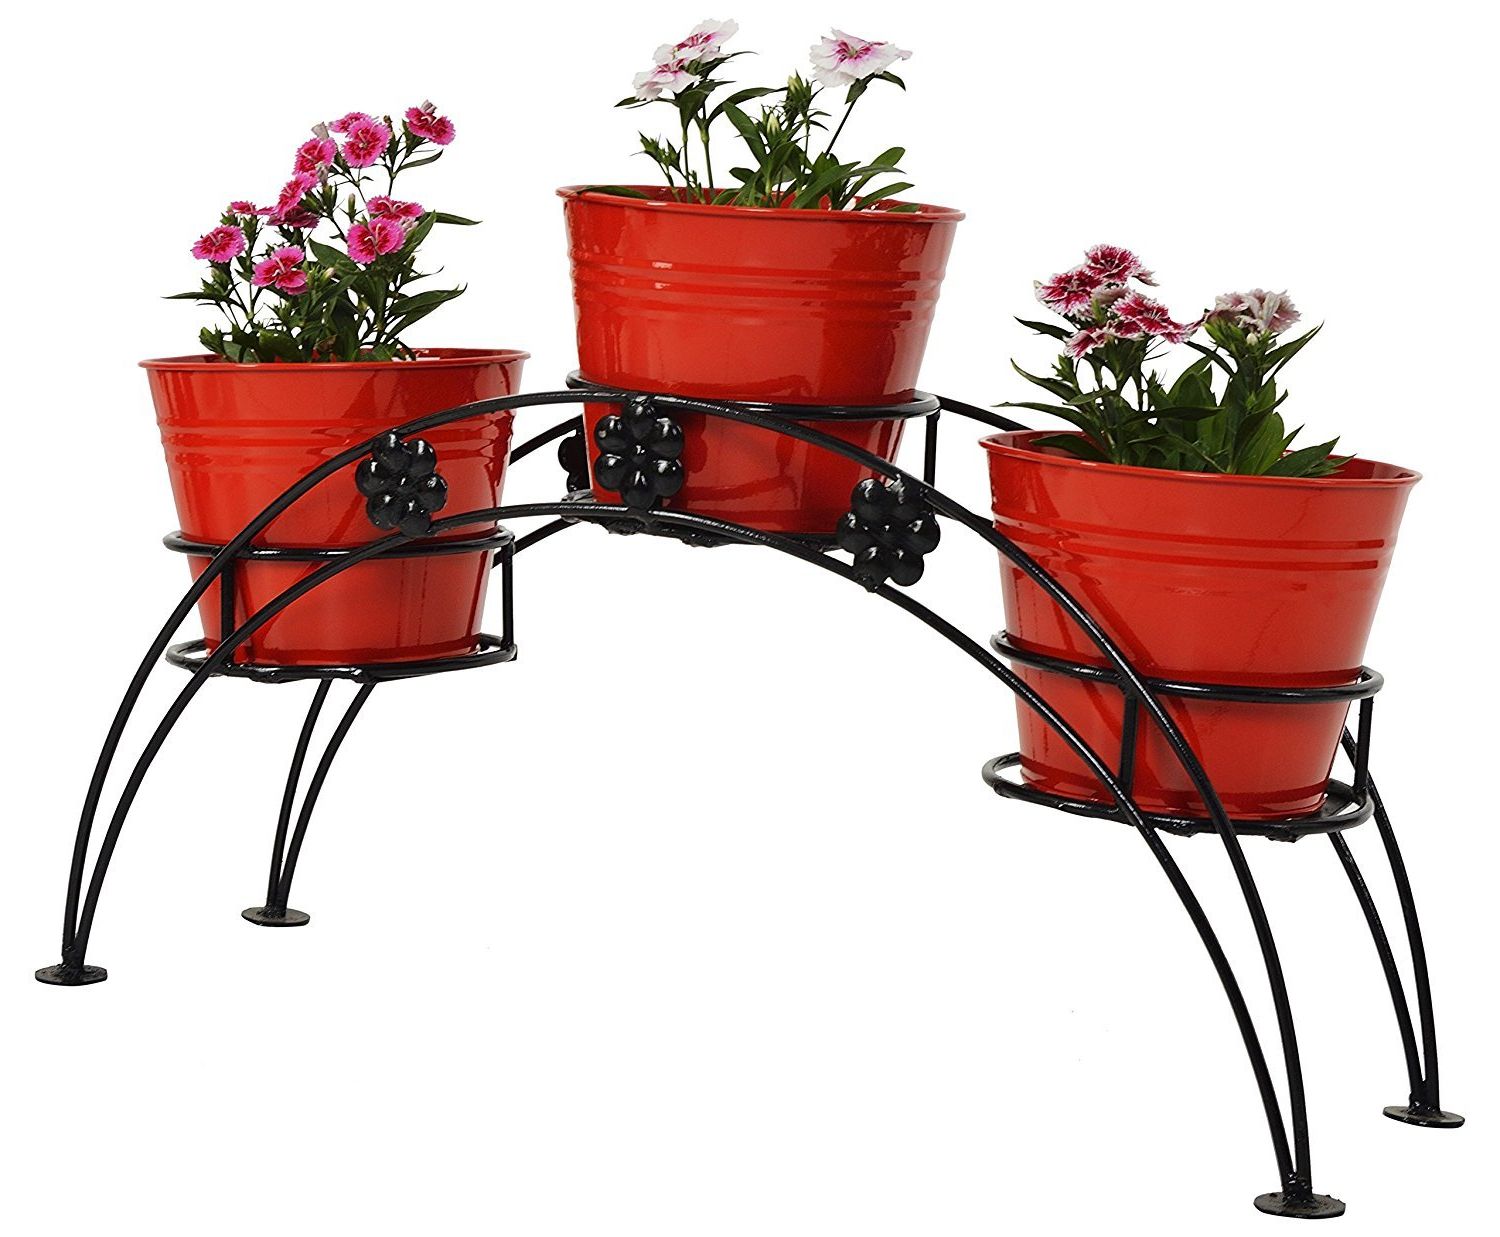 Green Gardenia Iron 3 Tier Pot Stand With Metal Planter (red) : Amazon (View 6 of 10)